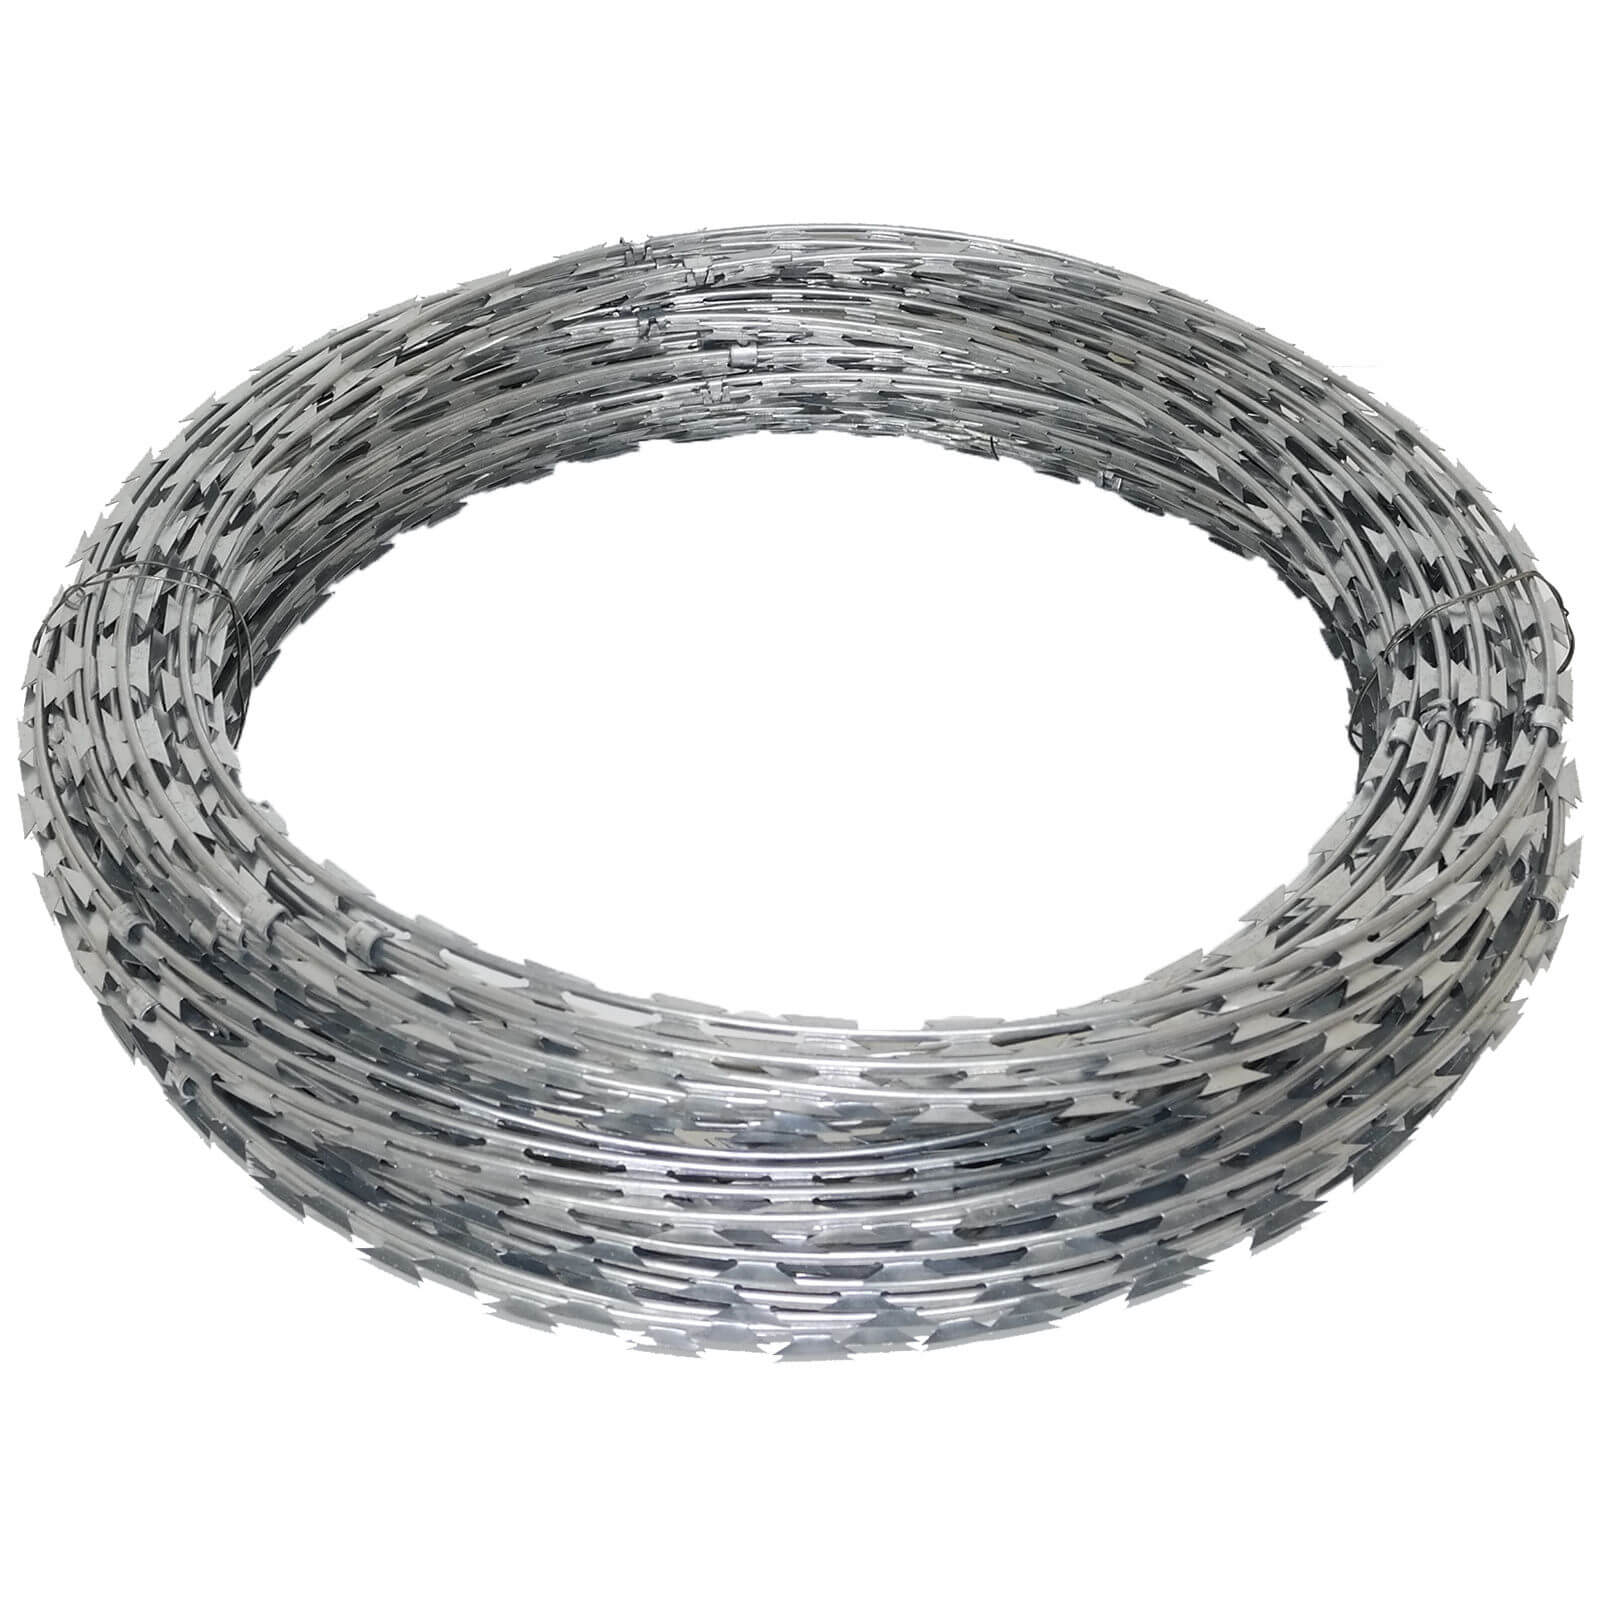 Advantages of Wel's Razor Wire Fencing Systems